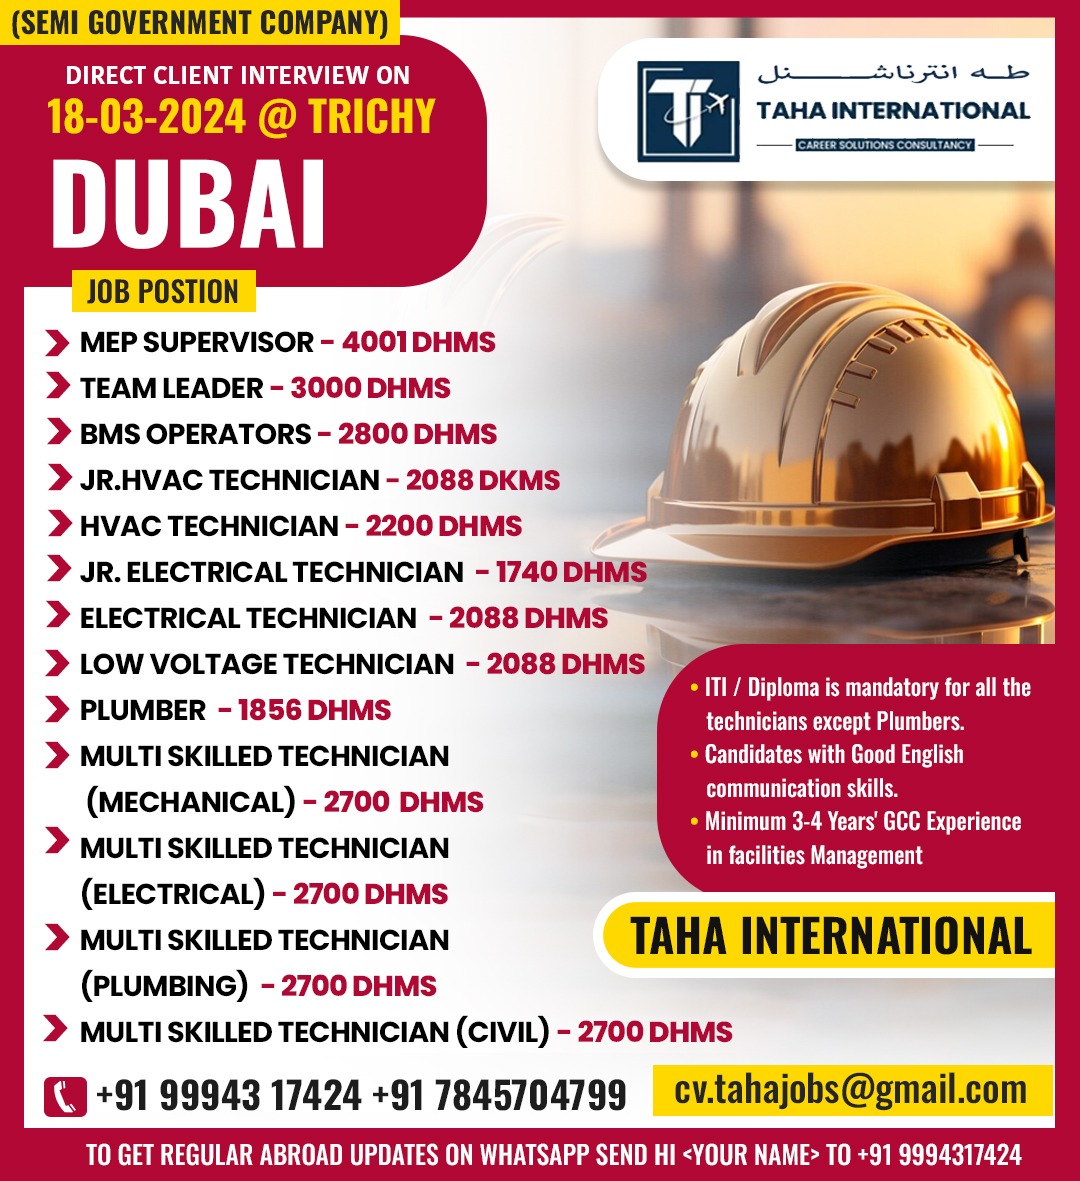 A LEADING SEMI GOVT COMPANY IN DUBAI – CLIENT INTERVIEW ON 18TH MARCH 2024 @ TRICHY